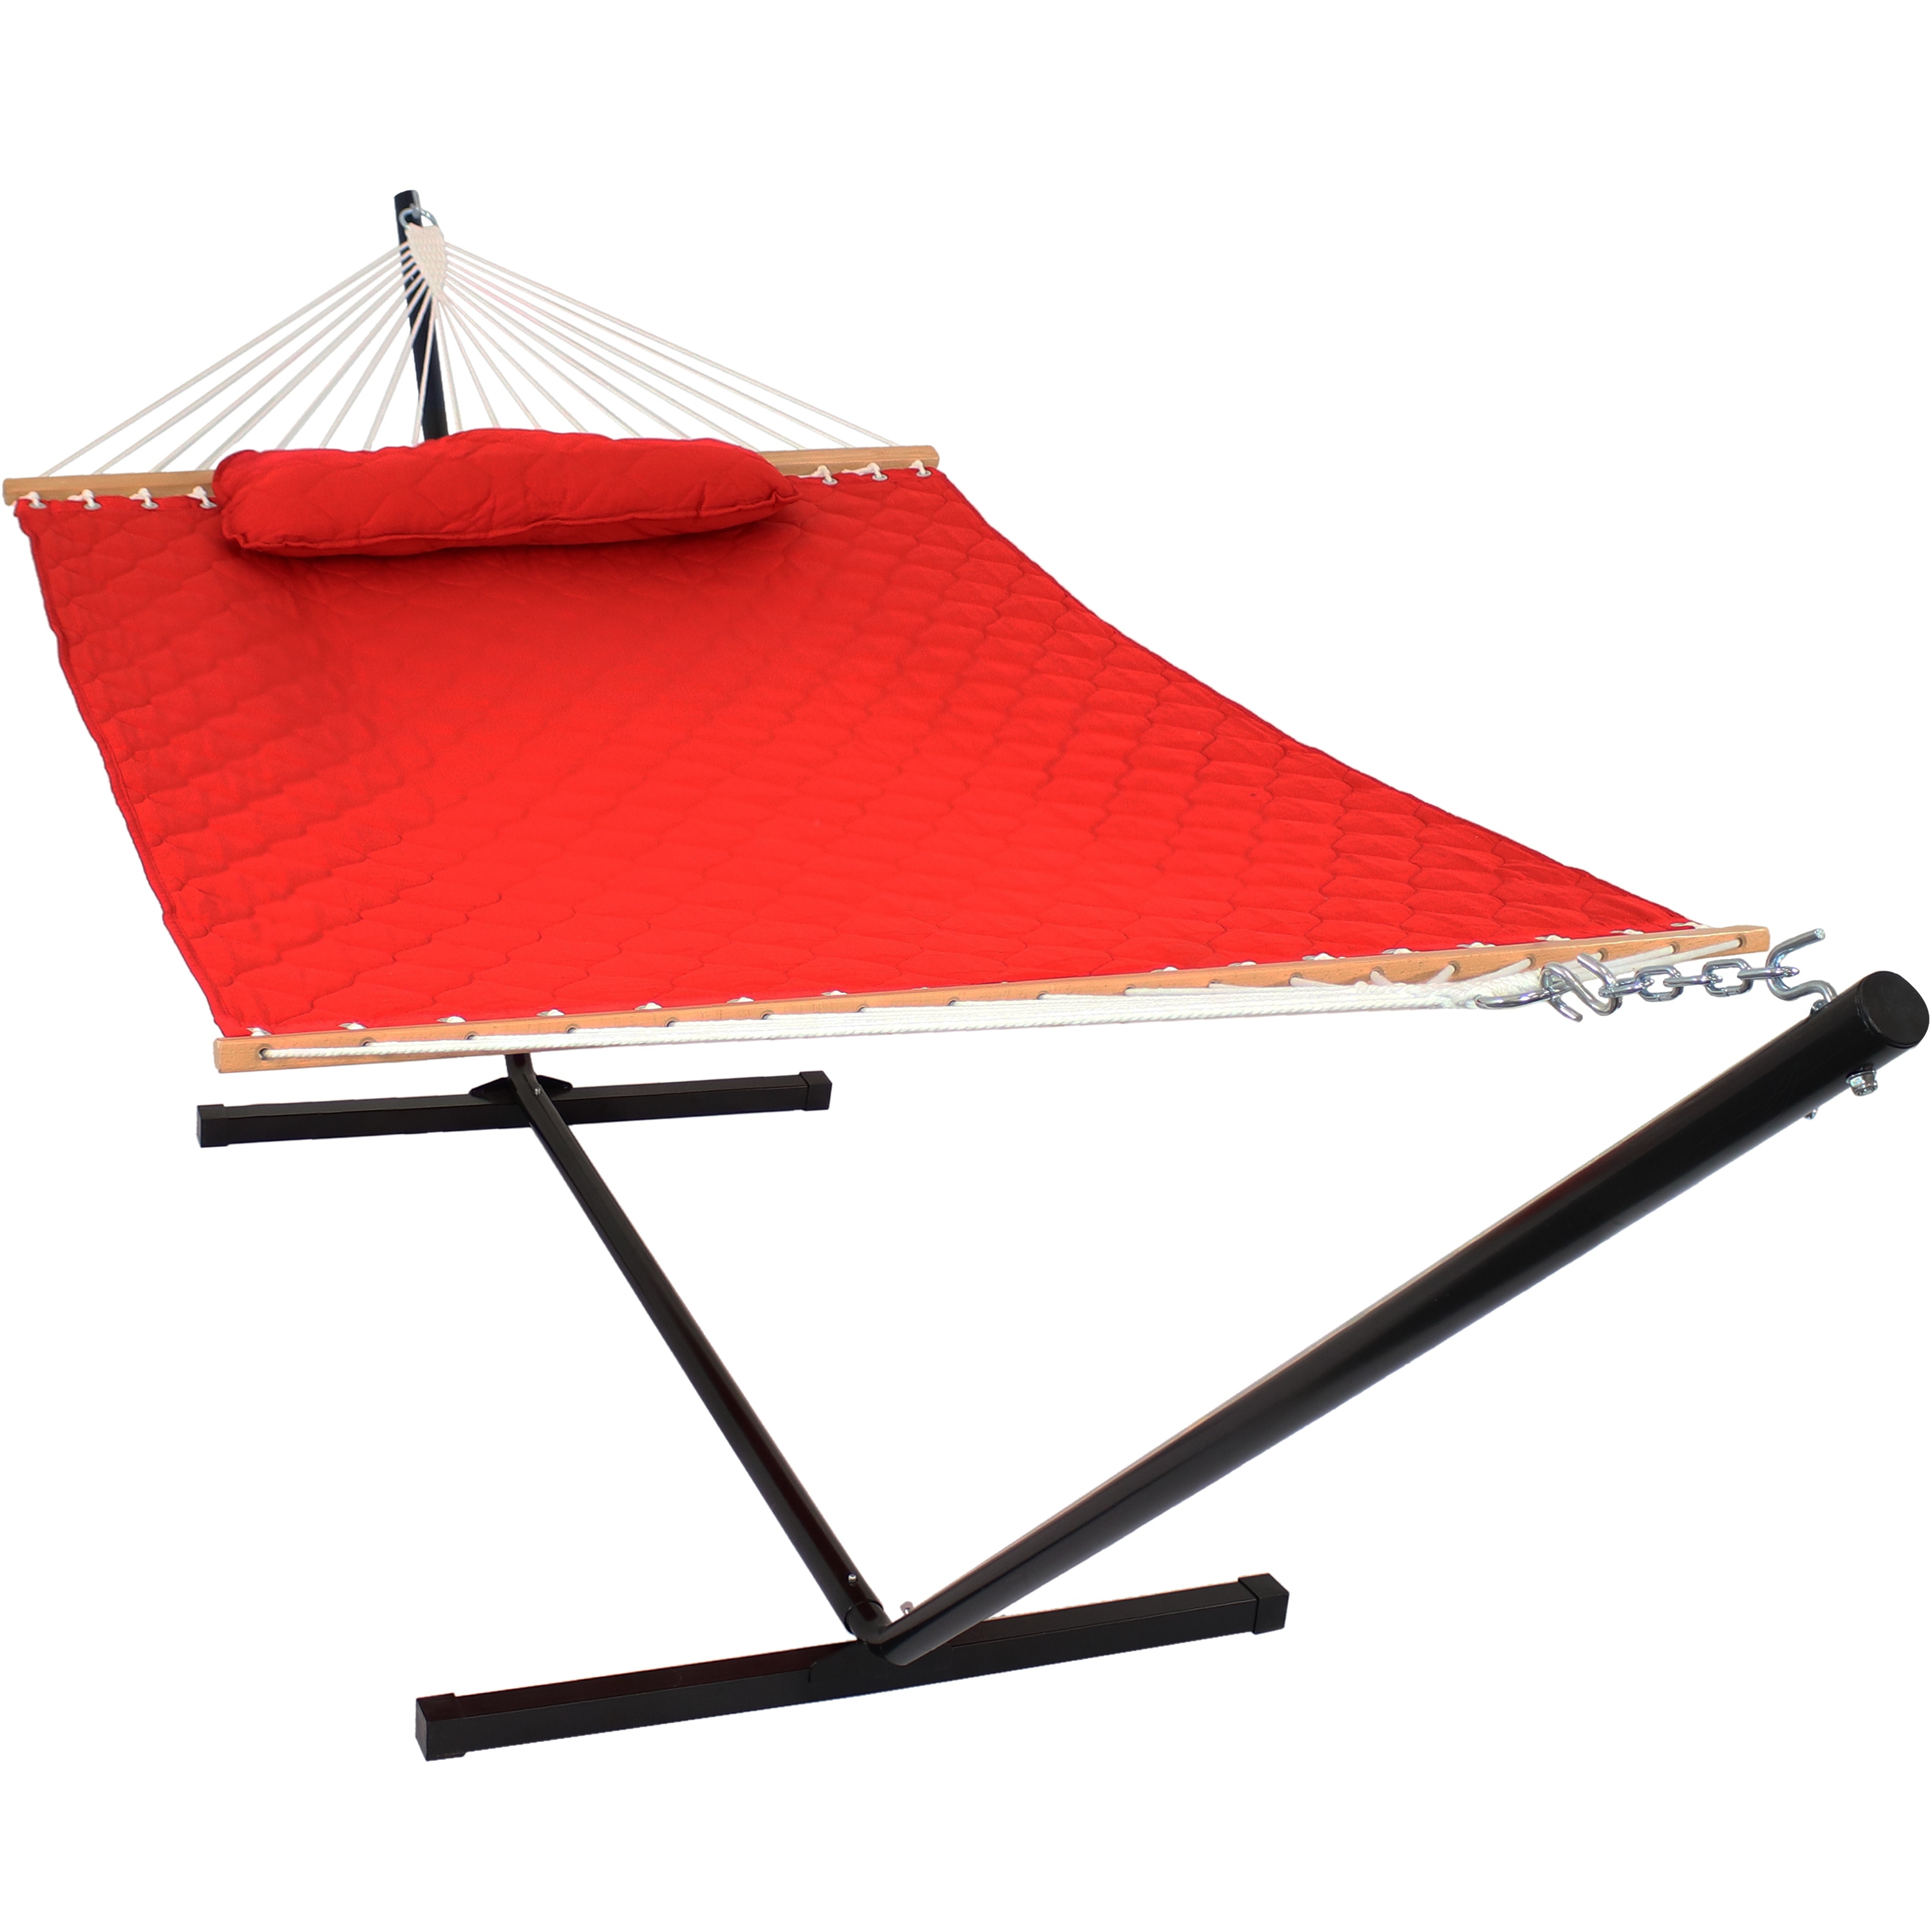 SUNNY GUARD 2 Person Double Hammock Quilted Fabric with Pillow，Wood Spreader Bars,75x55,Brown Stripes 